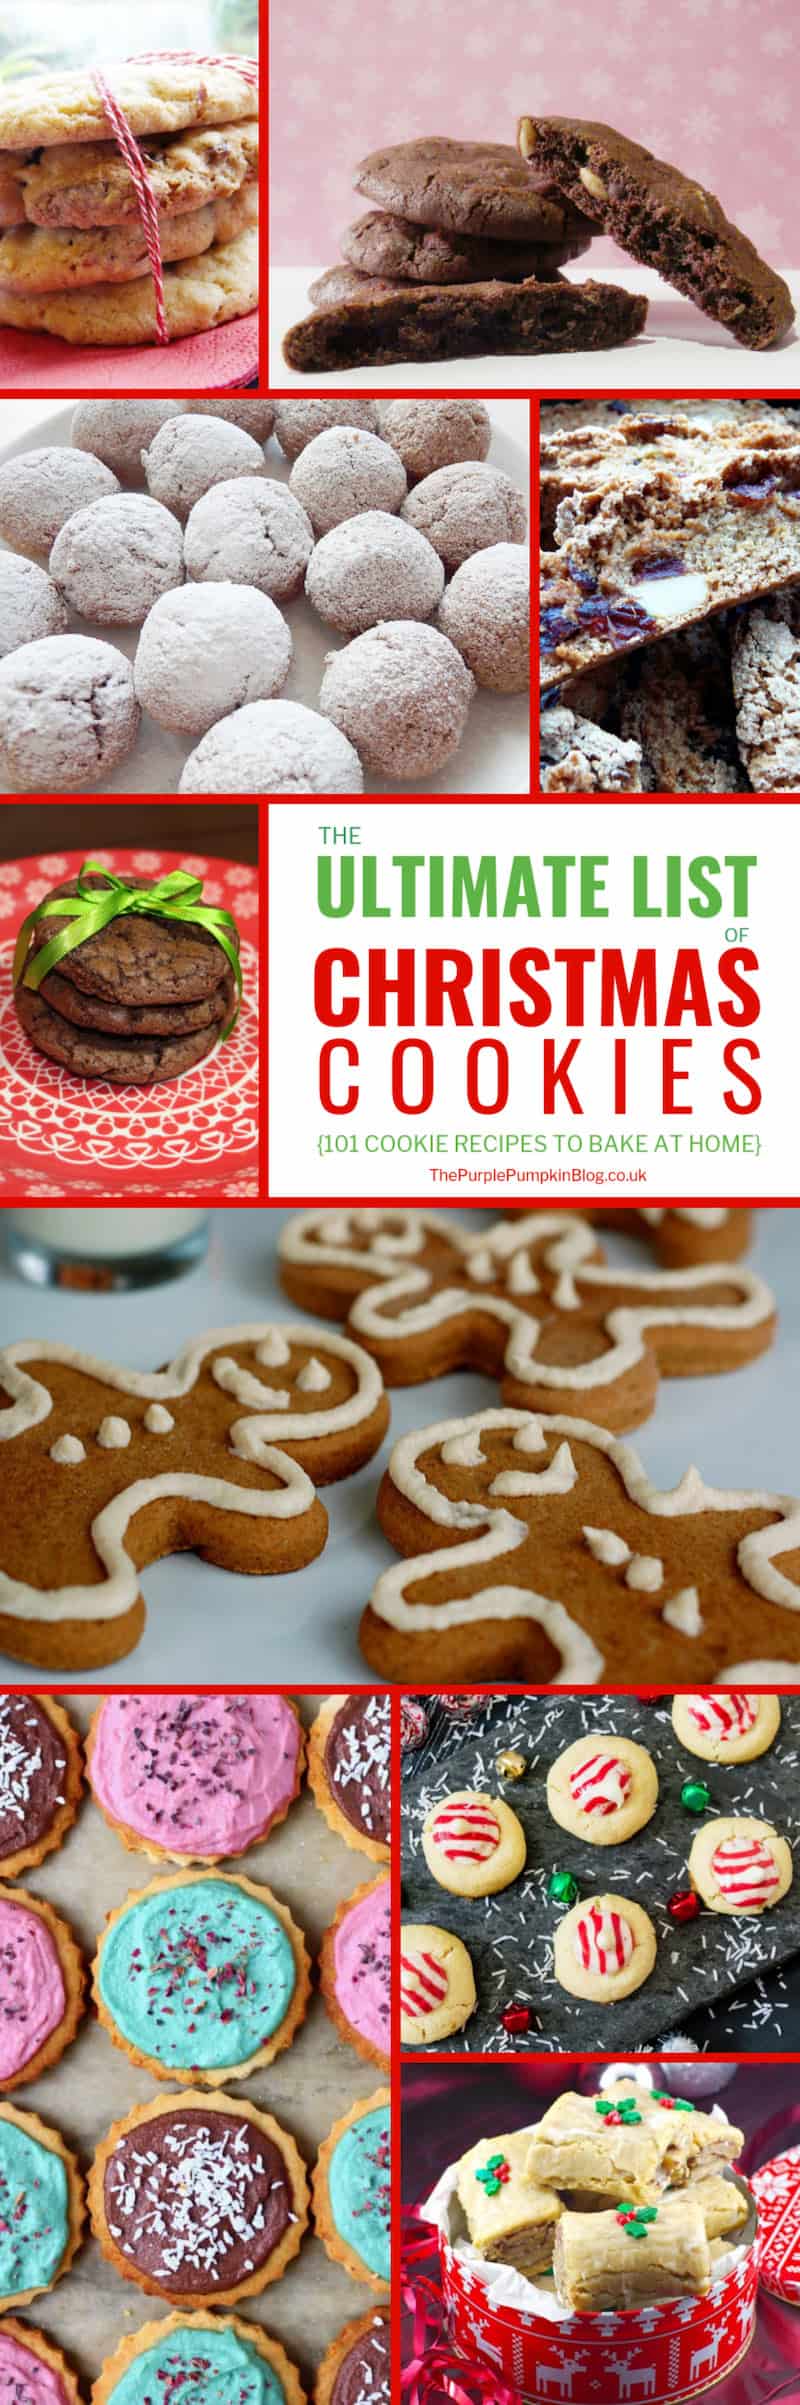 The ultimate list of Christmas cookies, with 101 Christmas cookie recipes to bake at home! So if you are a regular cookie maker, or only put your baking hat on during the Holidays, this list of Christmas cookie recipes has plenty to keep you busy all season long. I'm sure family and friends will thank you too! #ChristmasCookies #CookieRecipes #ChristmasRecipes